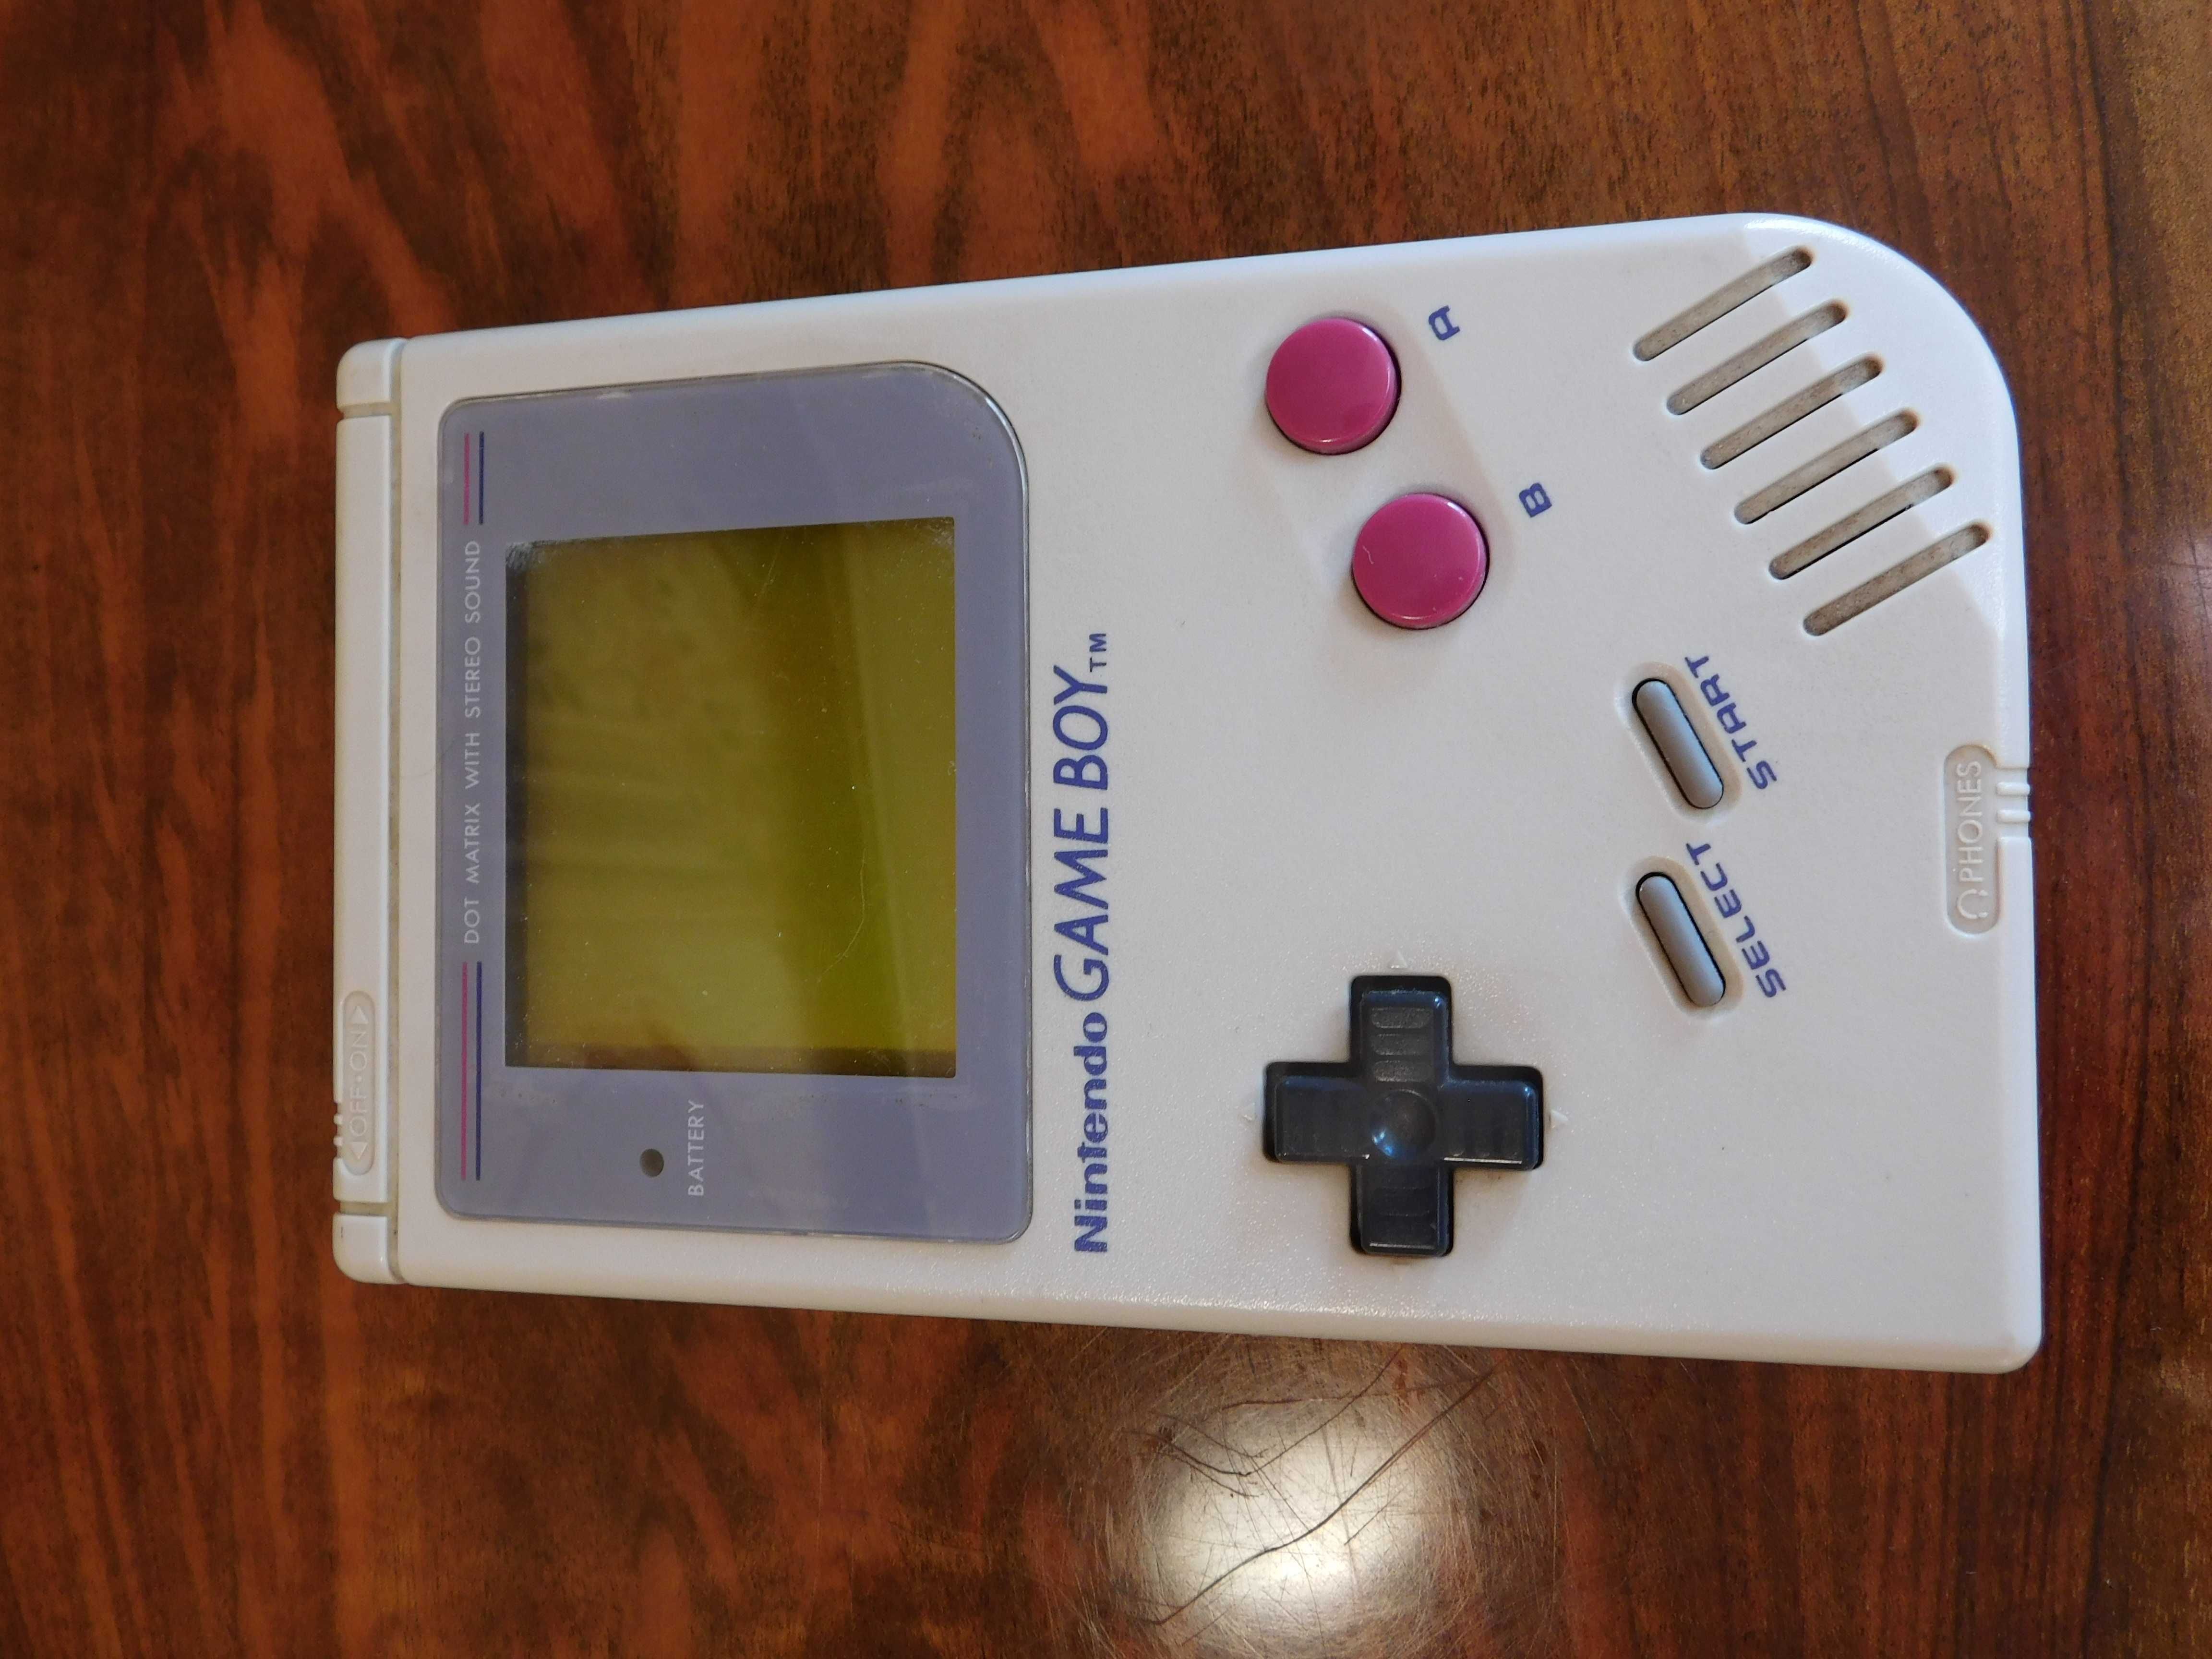 Gameboy Classic 1989 + 3 gry